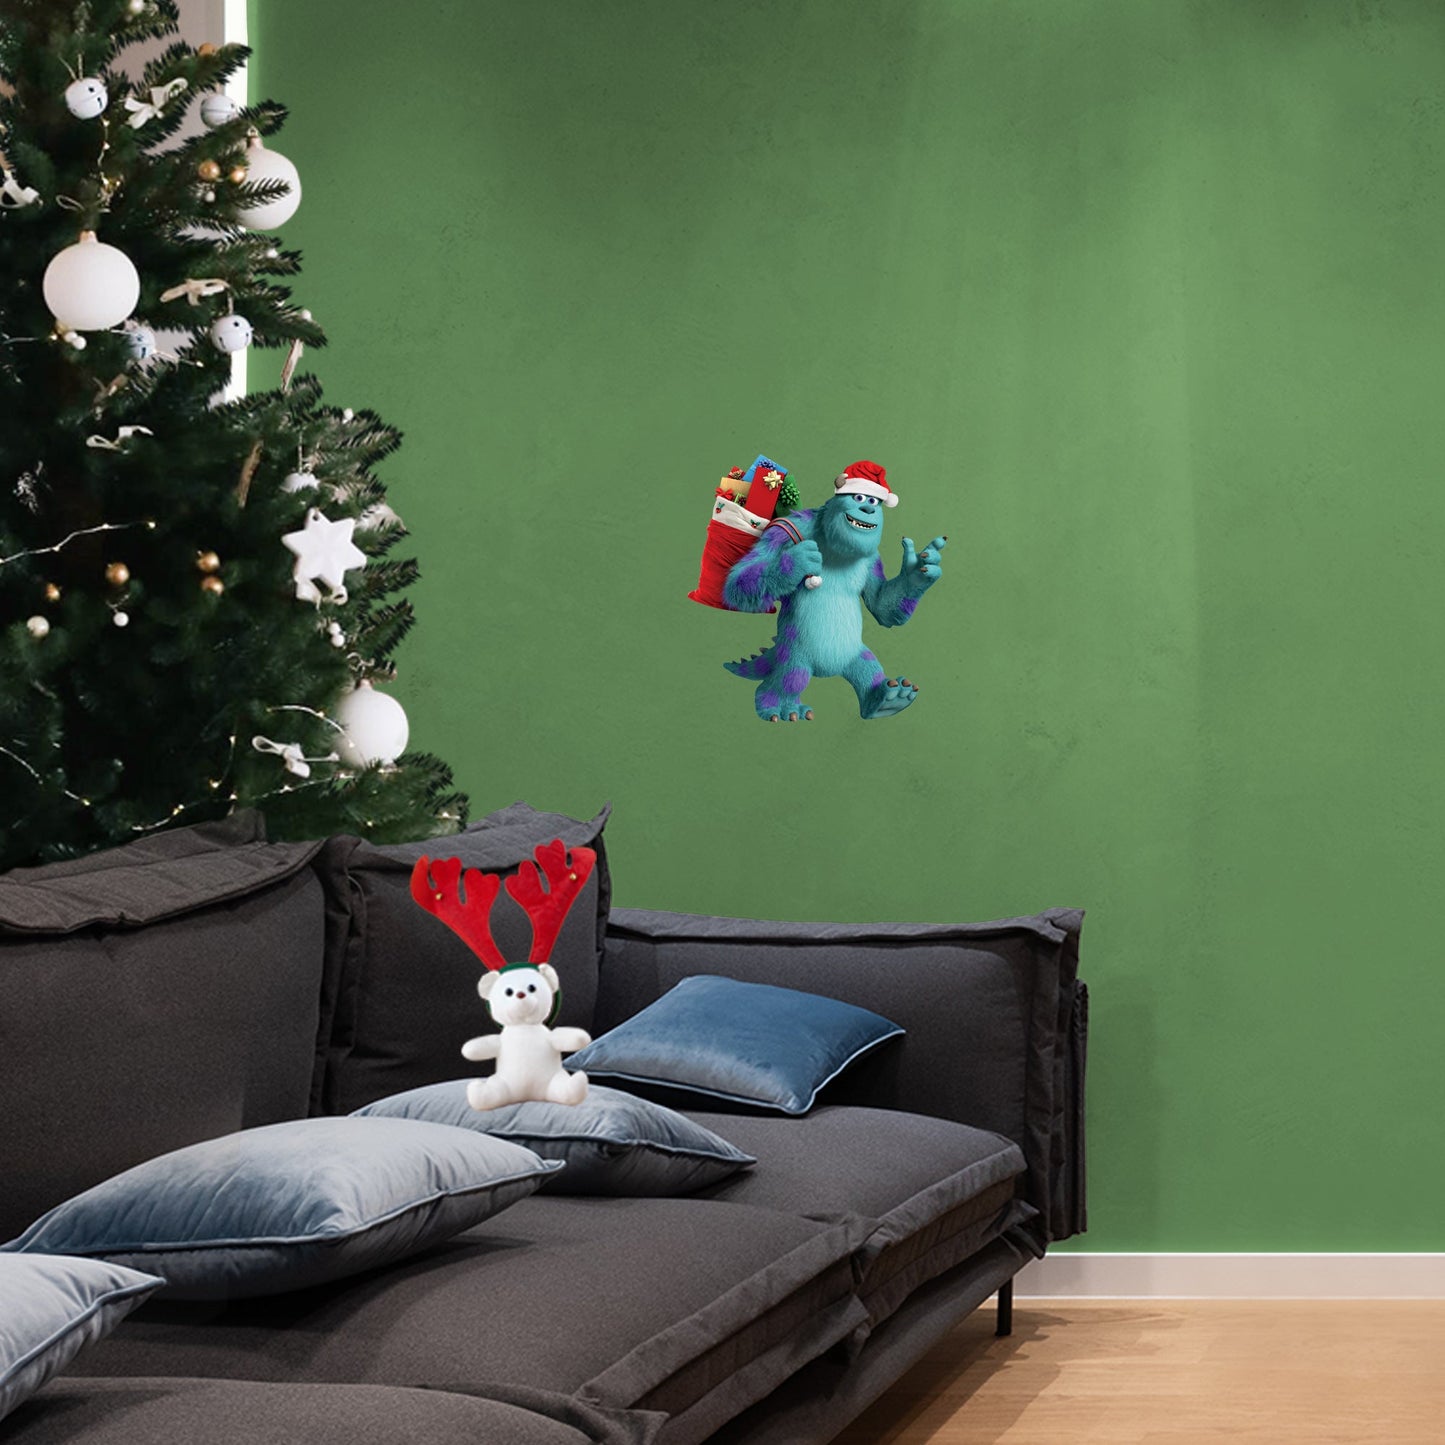 Pixar Holiday: Sulley Toy Sack RealBig - Officially Licensed Disney Removable Adhesive Decal